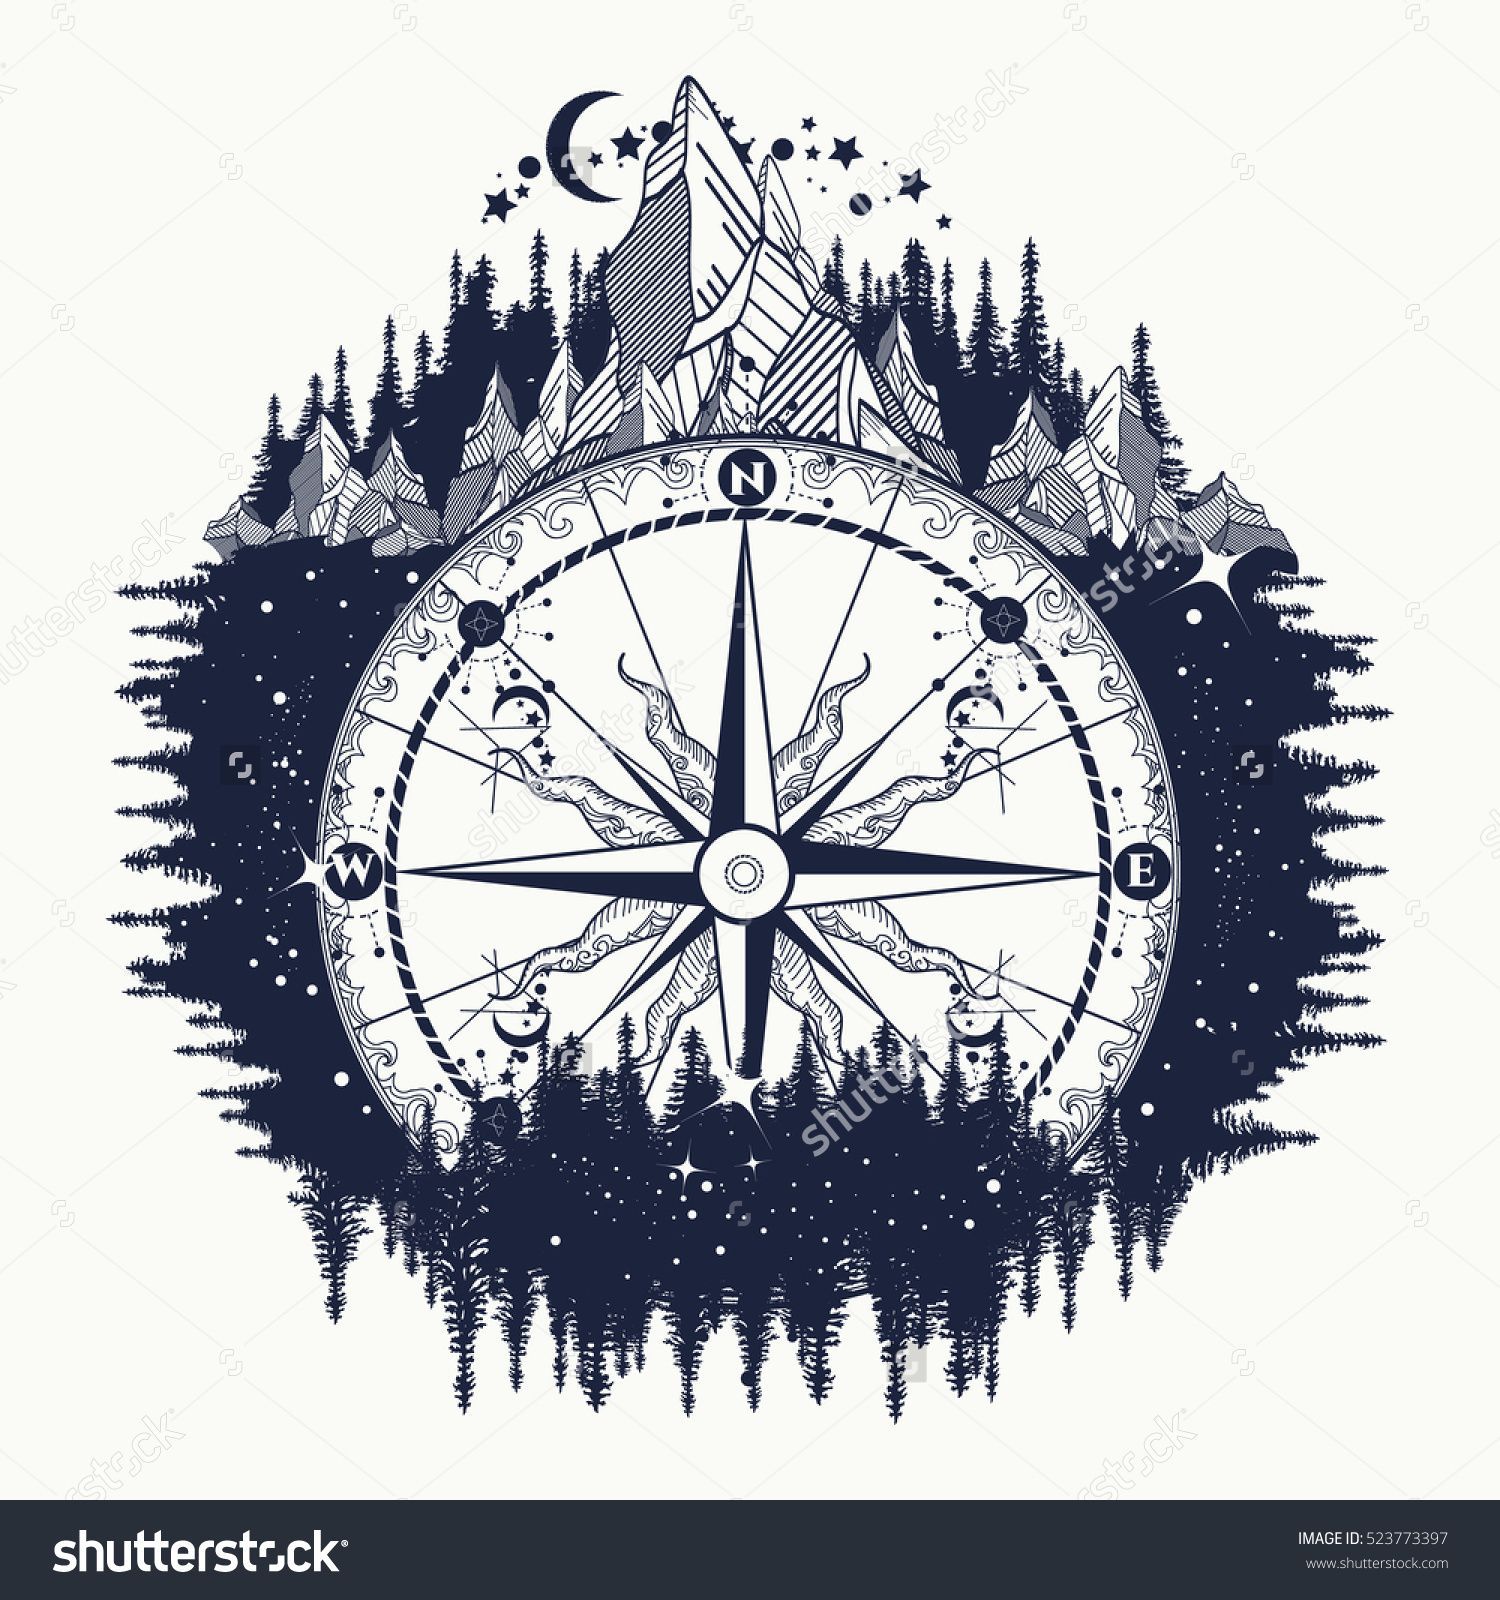 Mountain antique compass and wind rose tattoo art. Adventure, travel, outdoors, symbol. Tattoo for travelers, climbers, hikers.